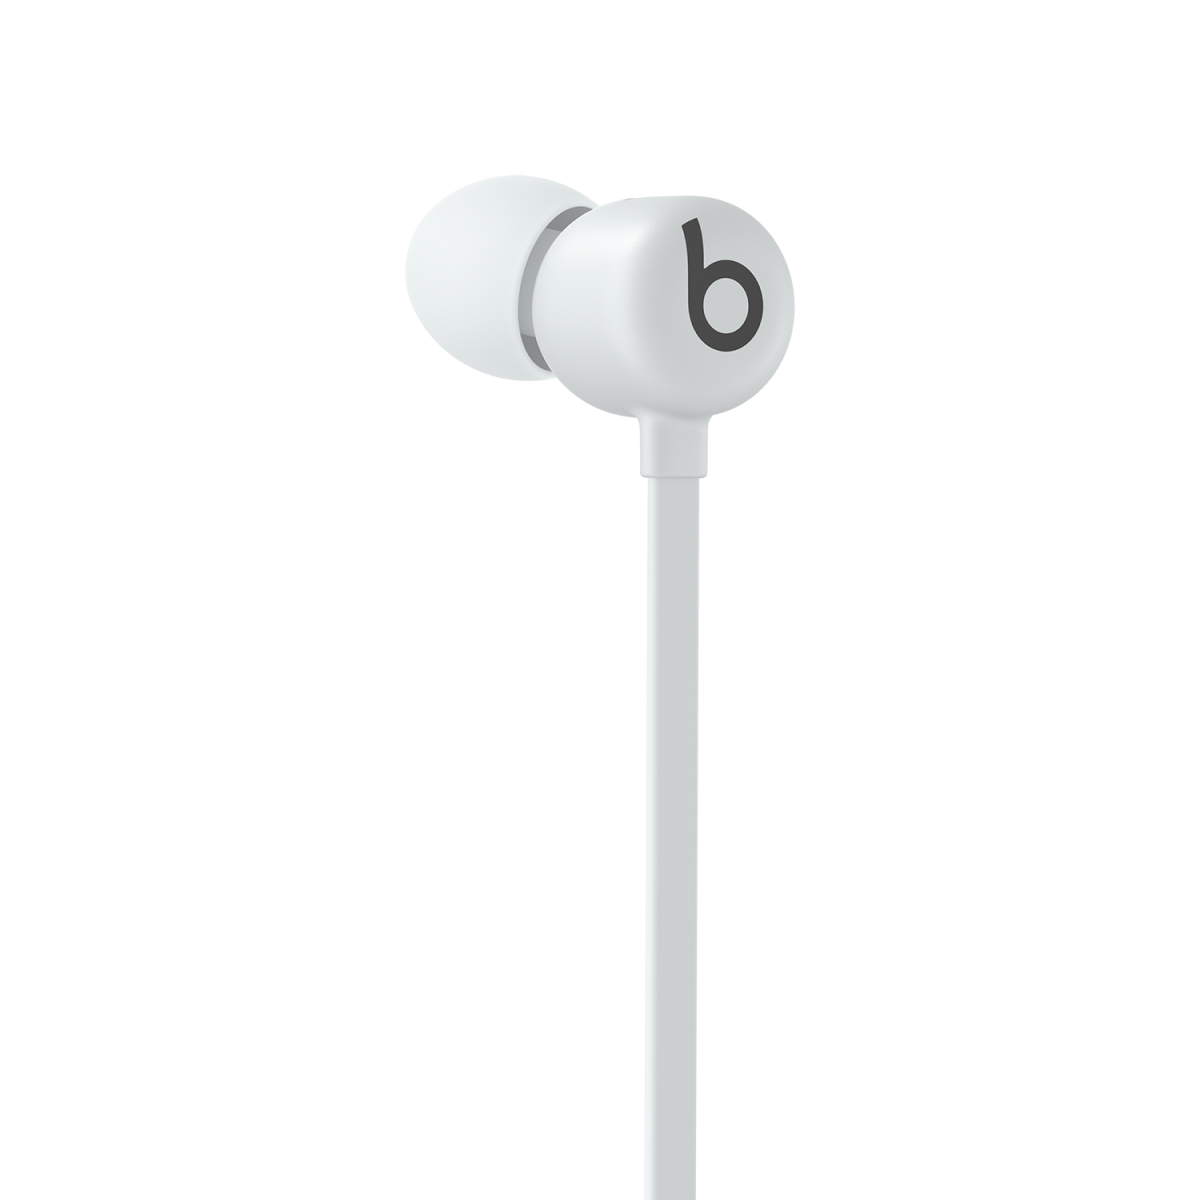  Beats Flex Wireless Earbuds - Apple W1 Headphone Chip, Magnetic  Earphones, Class 1 Bluetooth, 12 Hours of Listening Time, Built-in  Microphone - Smoke Gray : Electronics